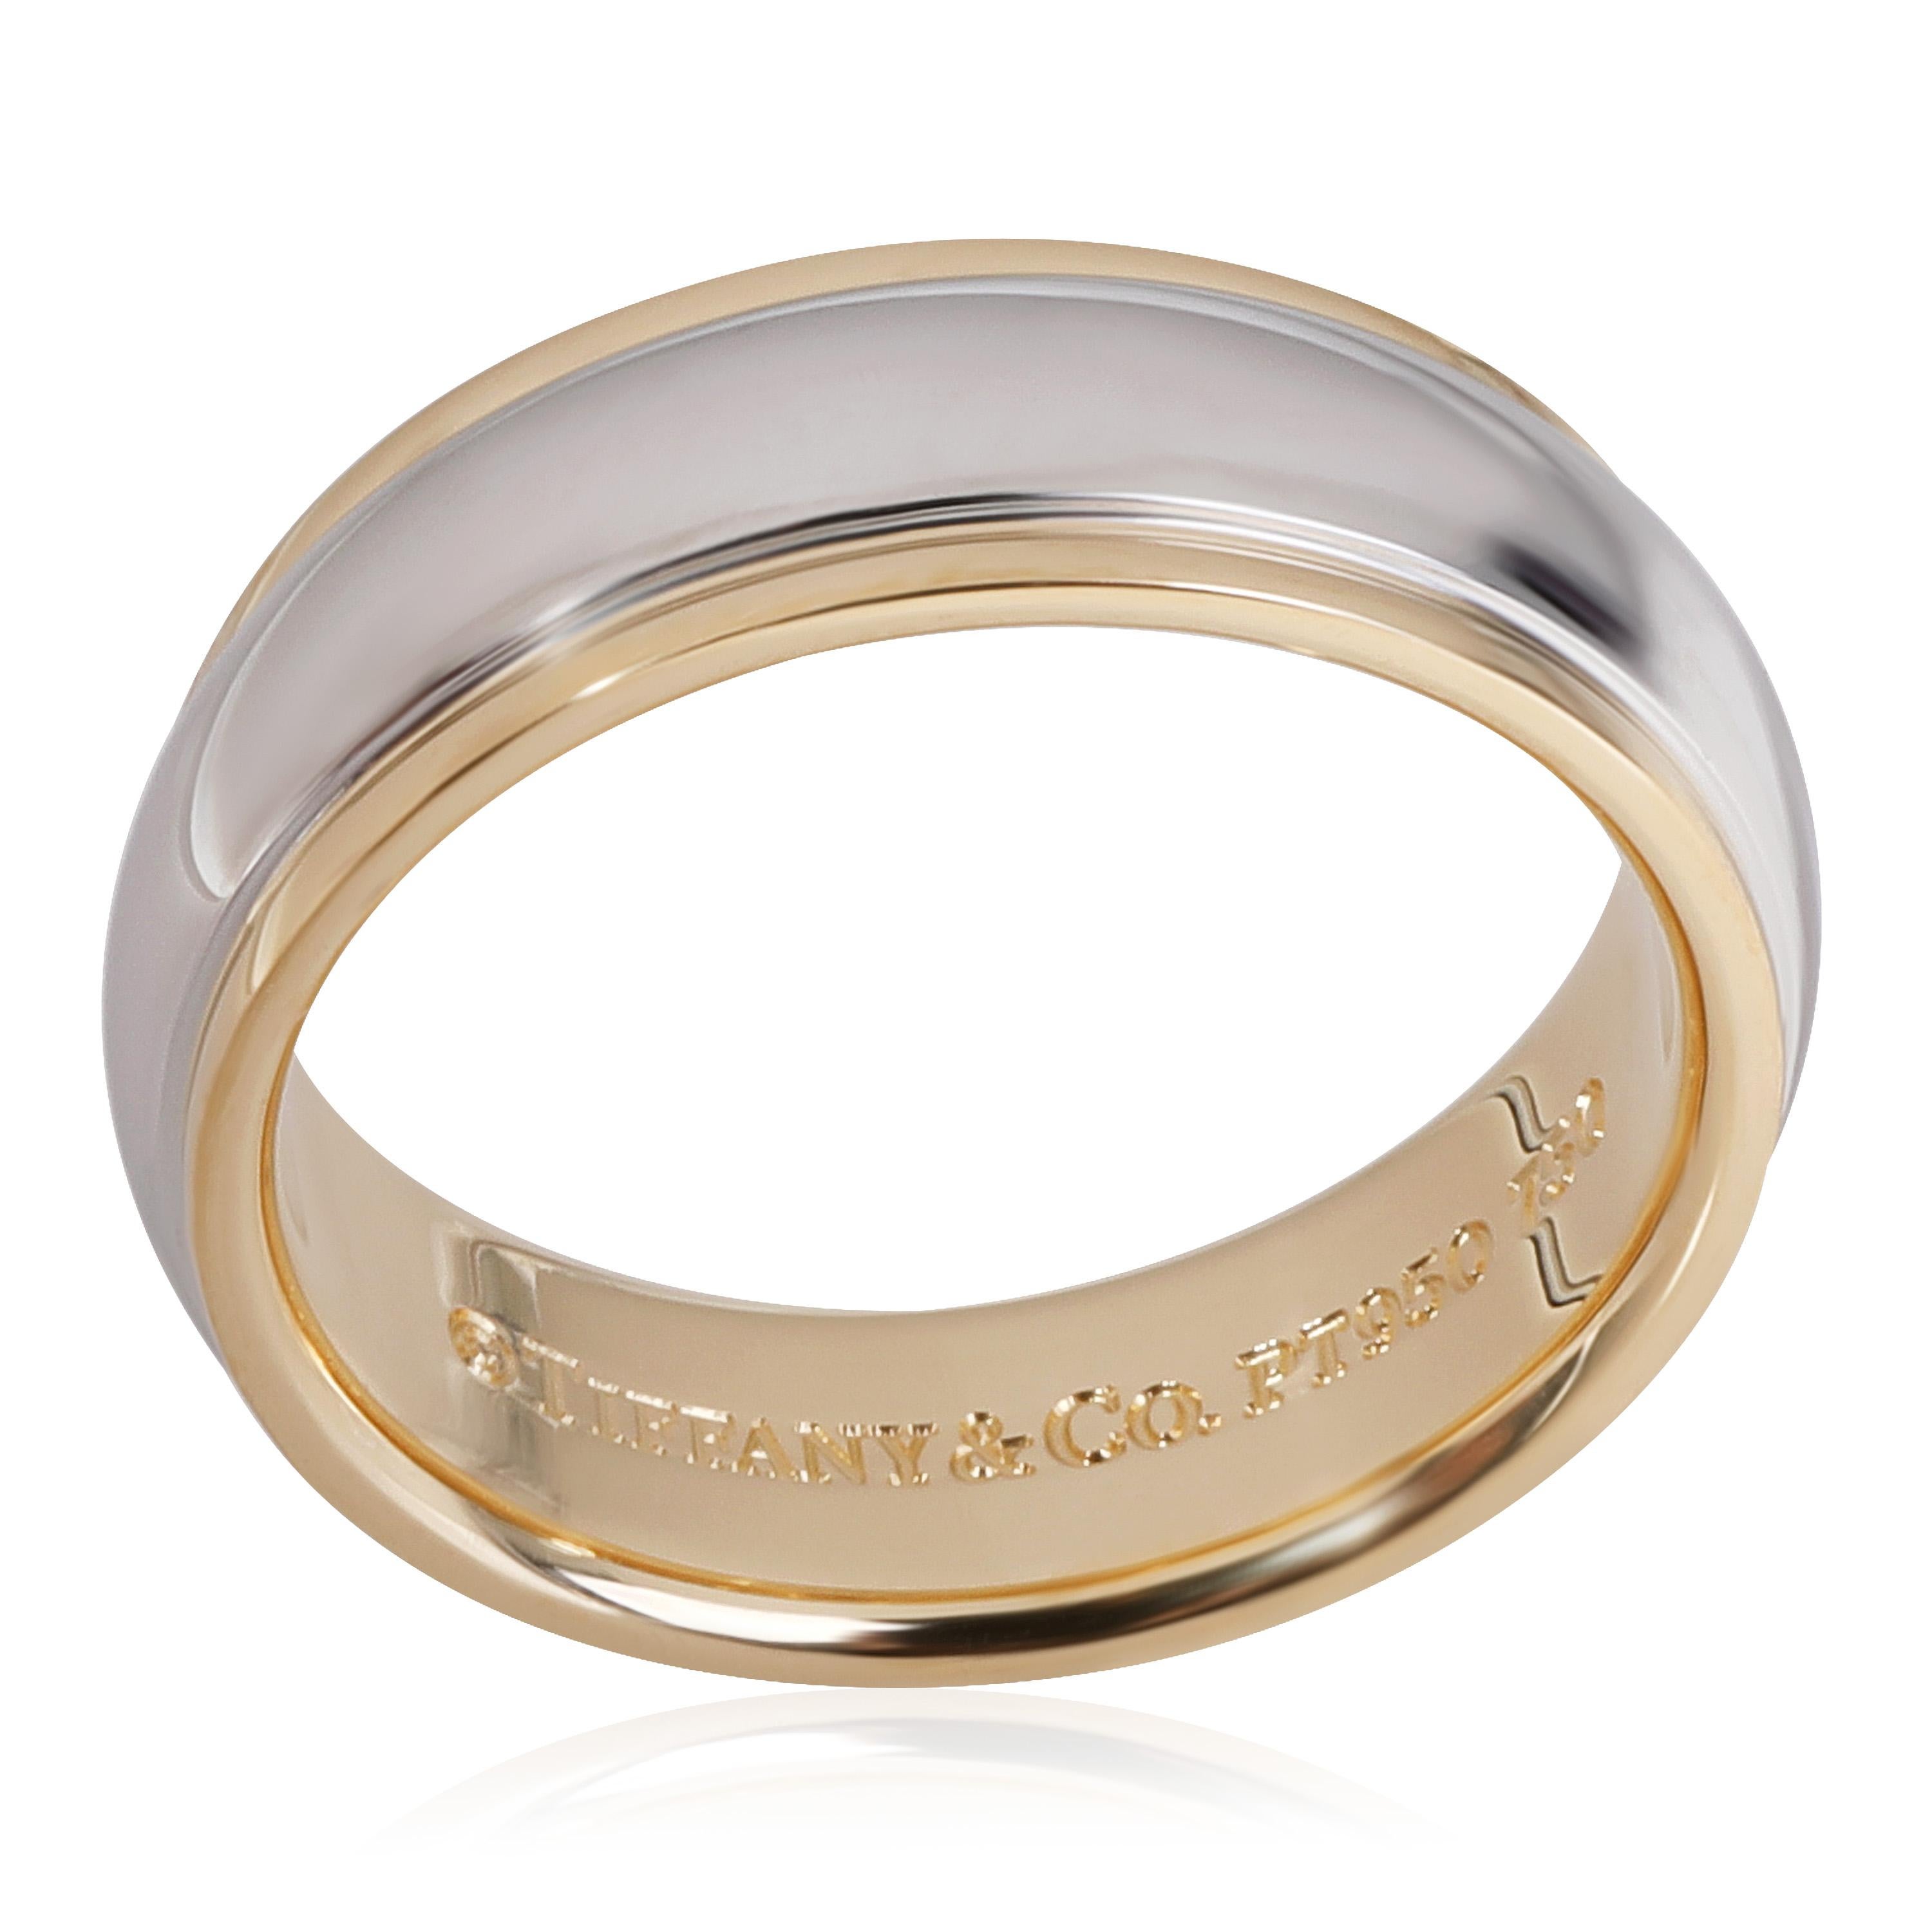 Tiffany & Co. Wedding Band in 18k Yellow Gold/Platinum In Excellent Condition For Sale In New York, NY